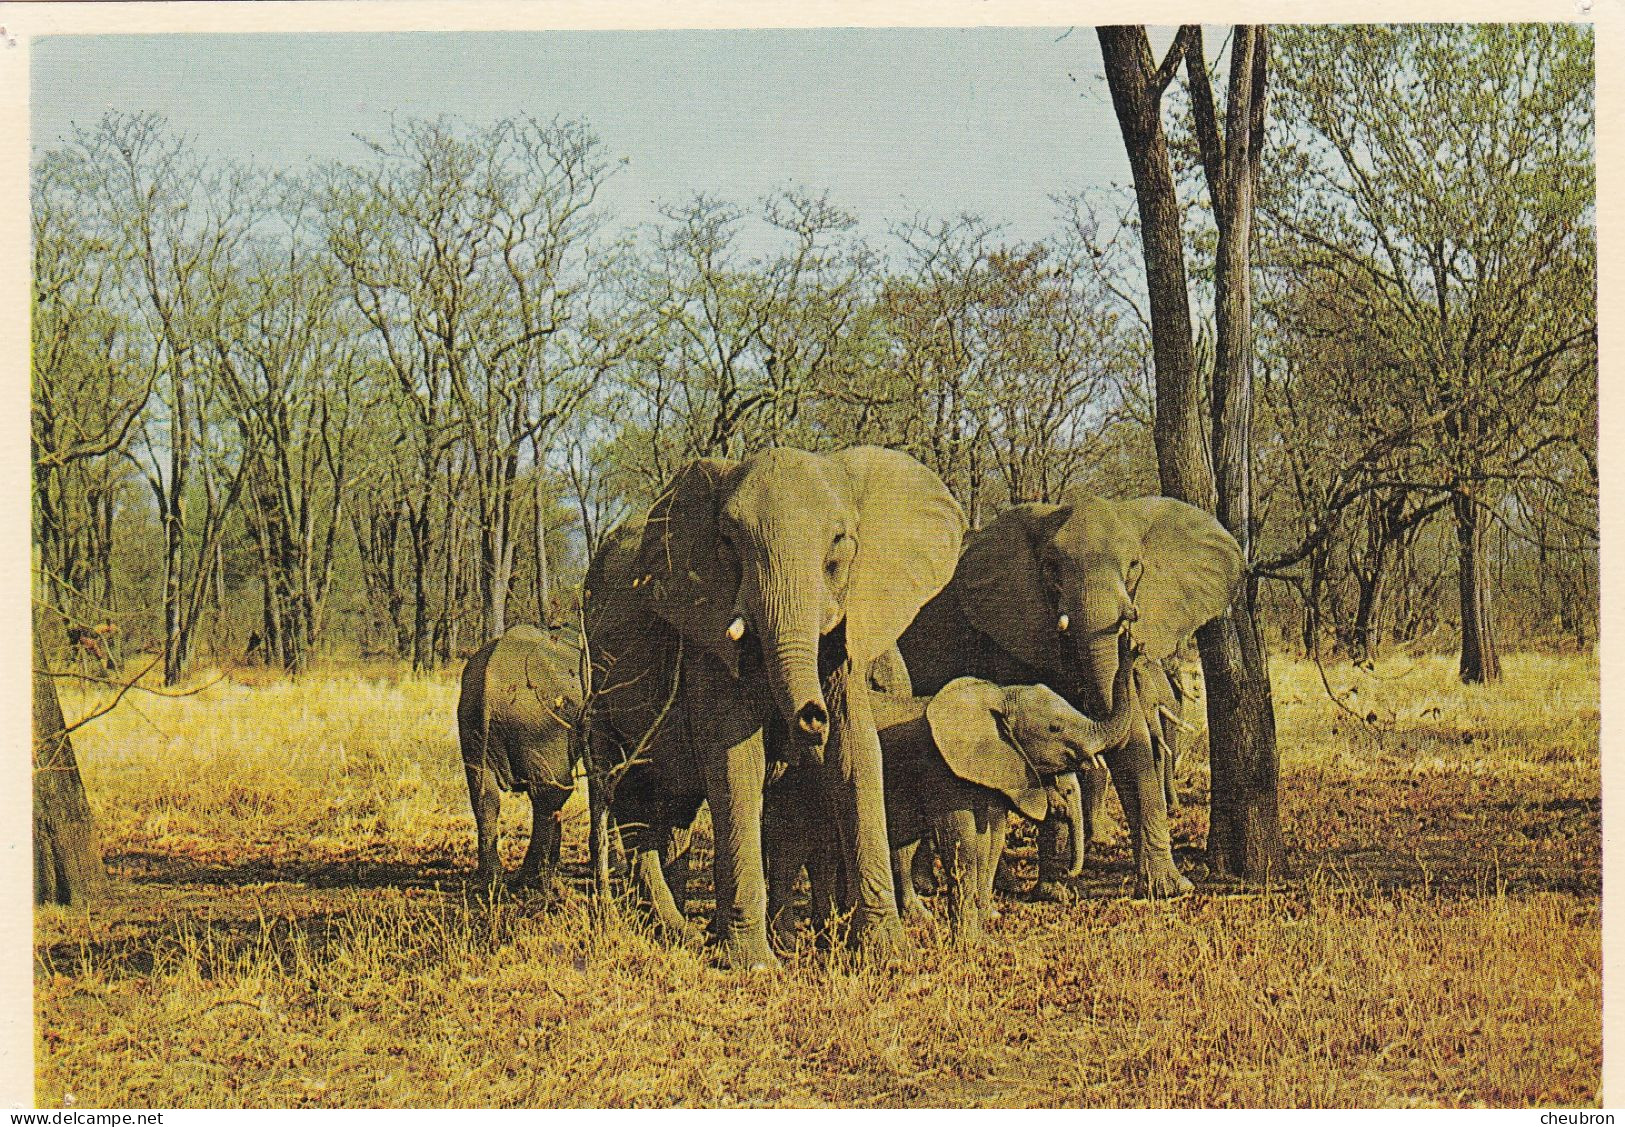 ANIMAUX & FAUNE.  CPSM. ELEPHANTS."HERD OF ELEPHANTS AND THEIR CALVES "  AFRIQUE DU SUD. NATURAL GAME RESERVES - Elefantes